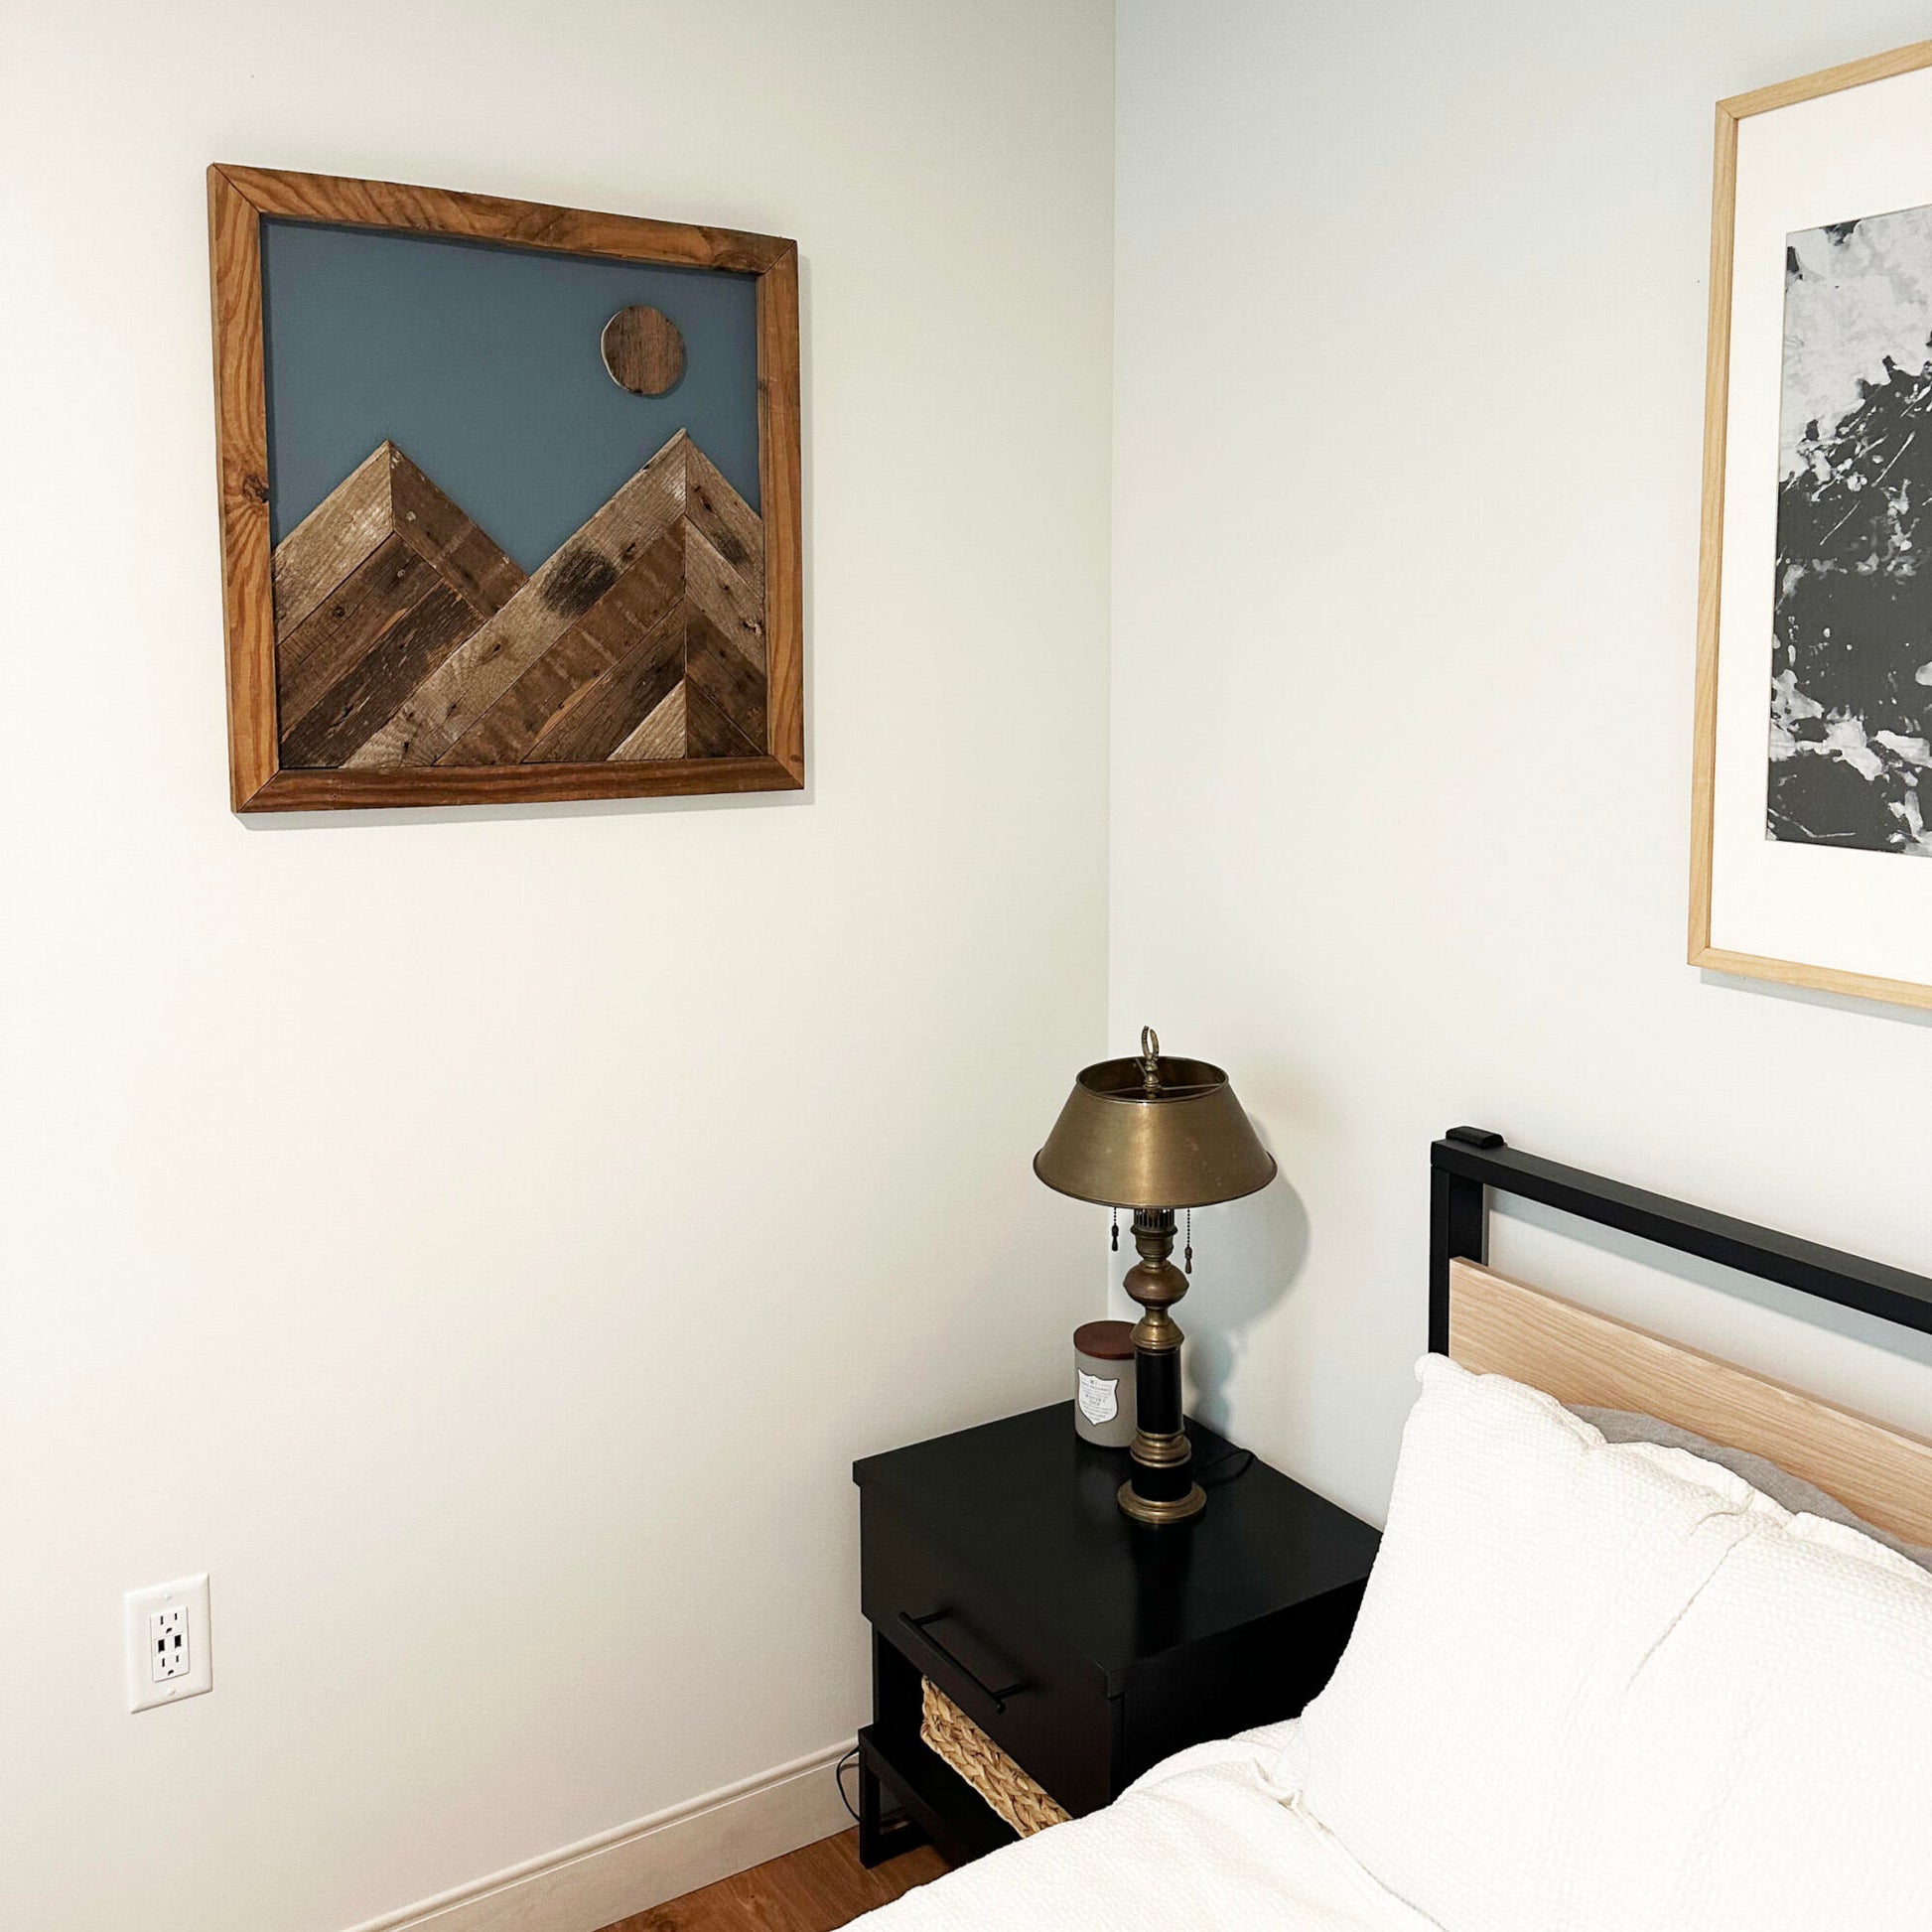 wall decor that looks like two mountains with a full moon overtop. Mountains, moon, and frame of wall decor all made from reclaimed barnwood. Wood shows grain patterns and other distressed characteristics. Mounted on a wall in a bedroom setting.